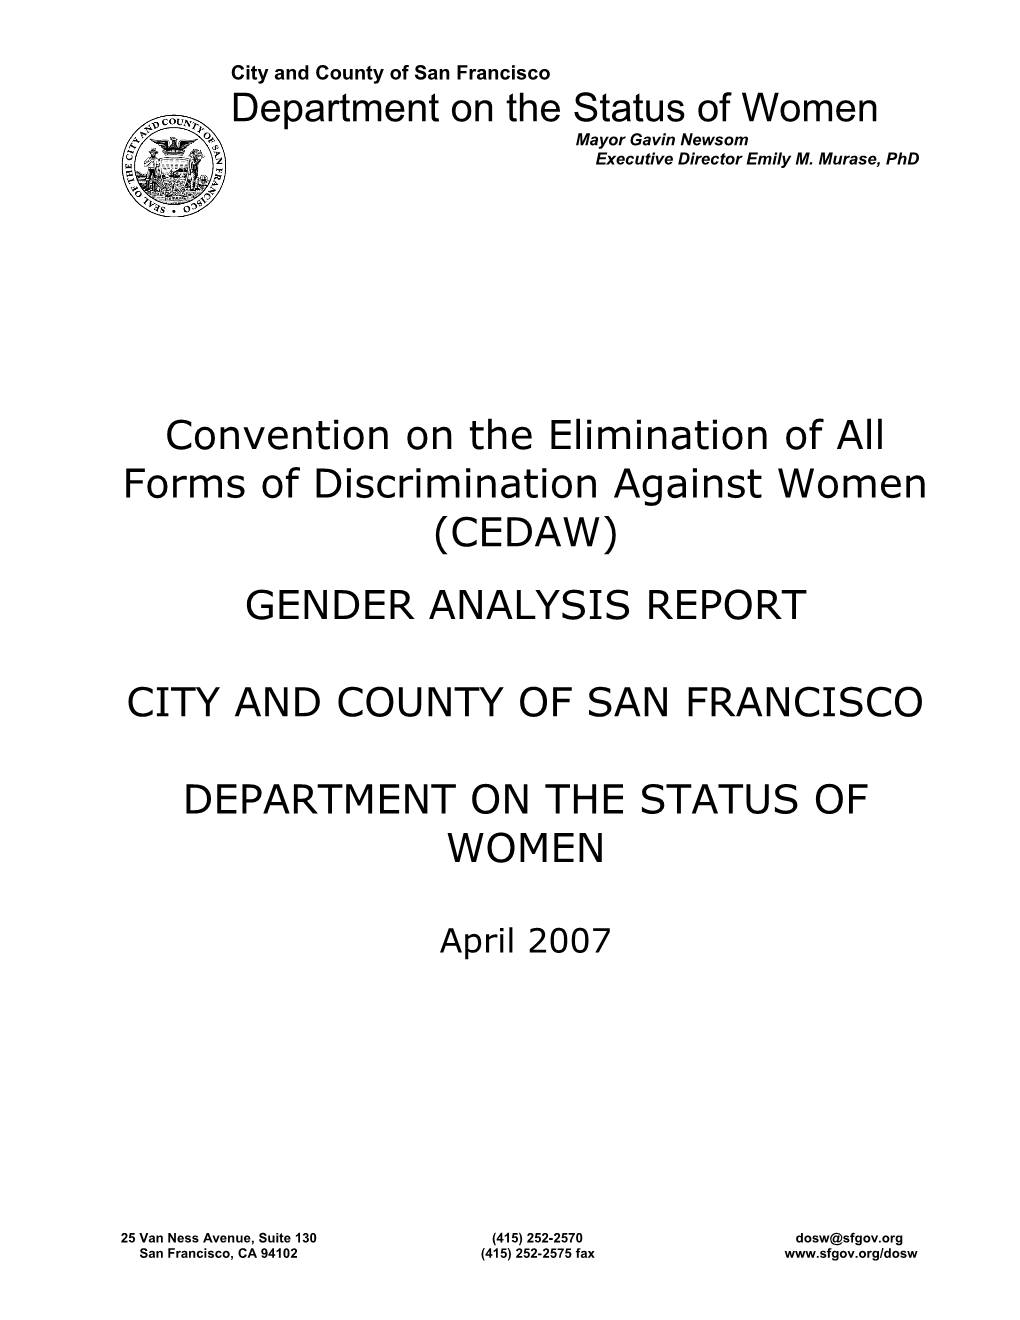 San Francisco Department on the Status of Women